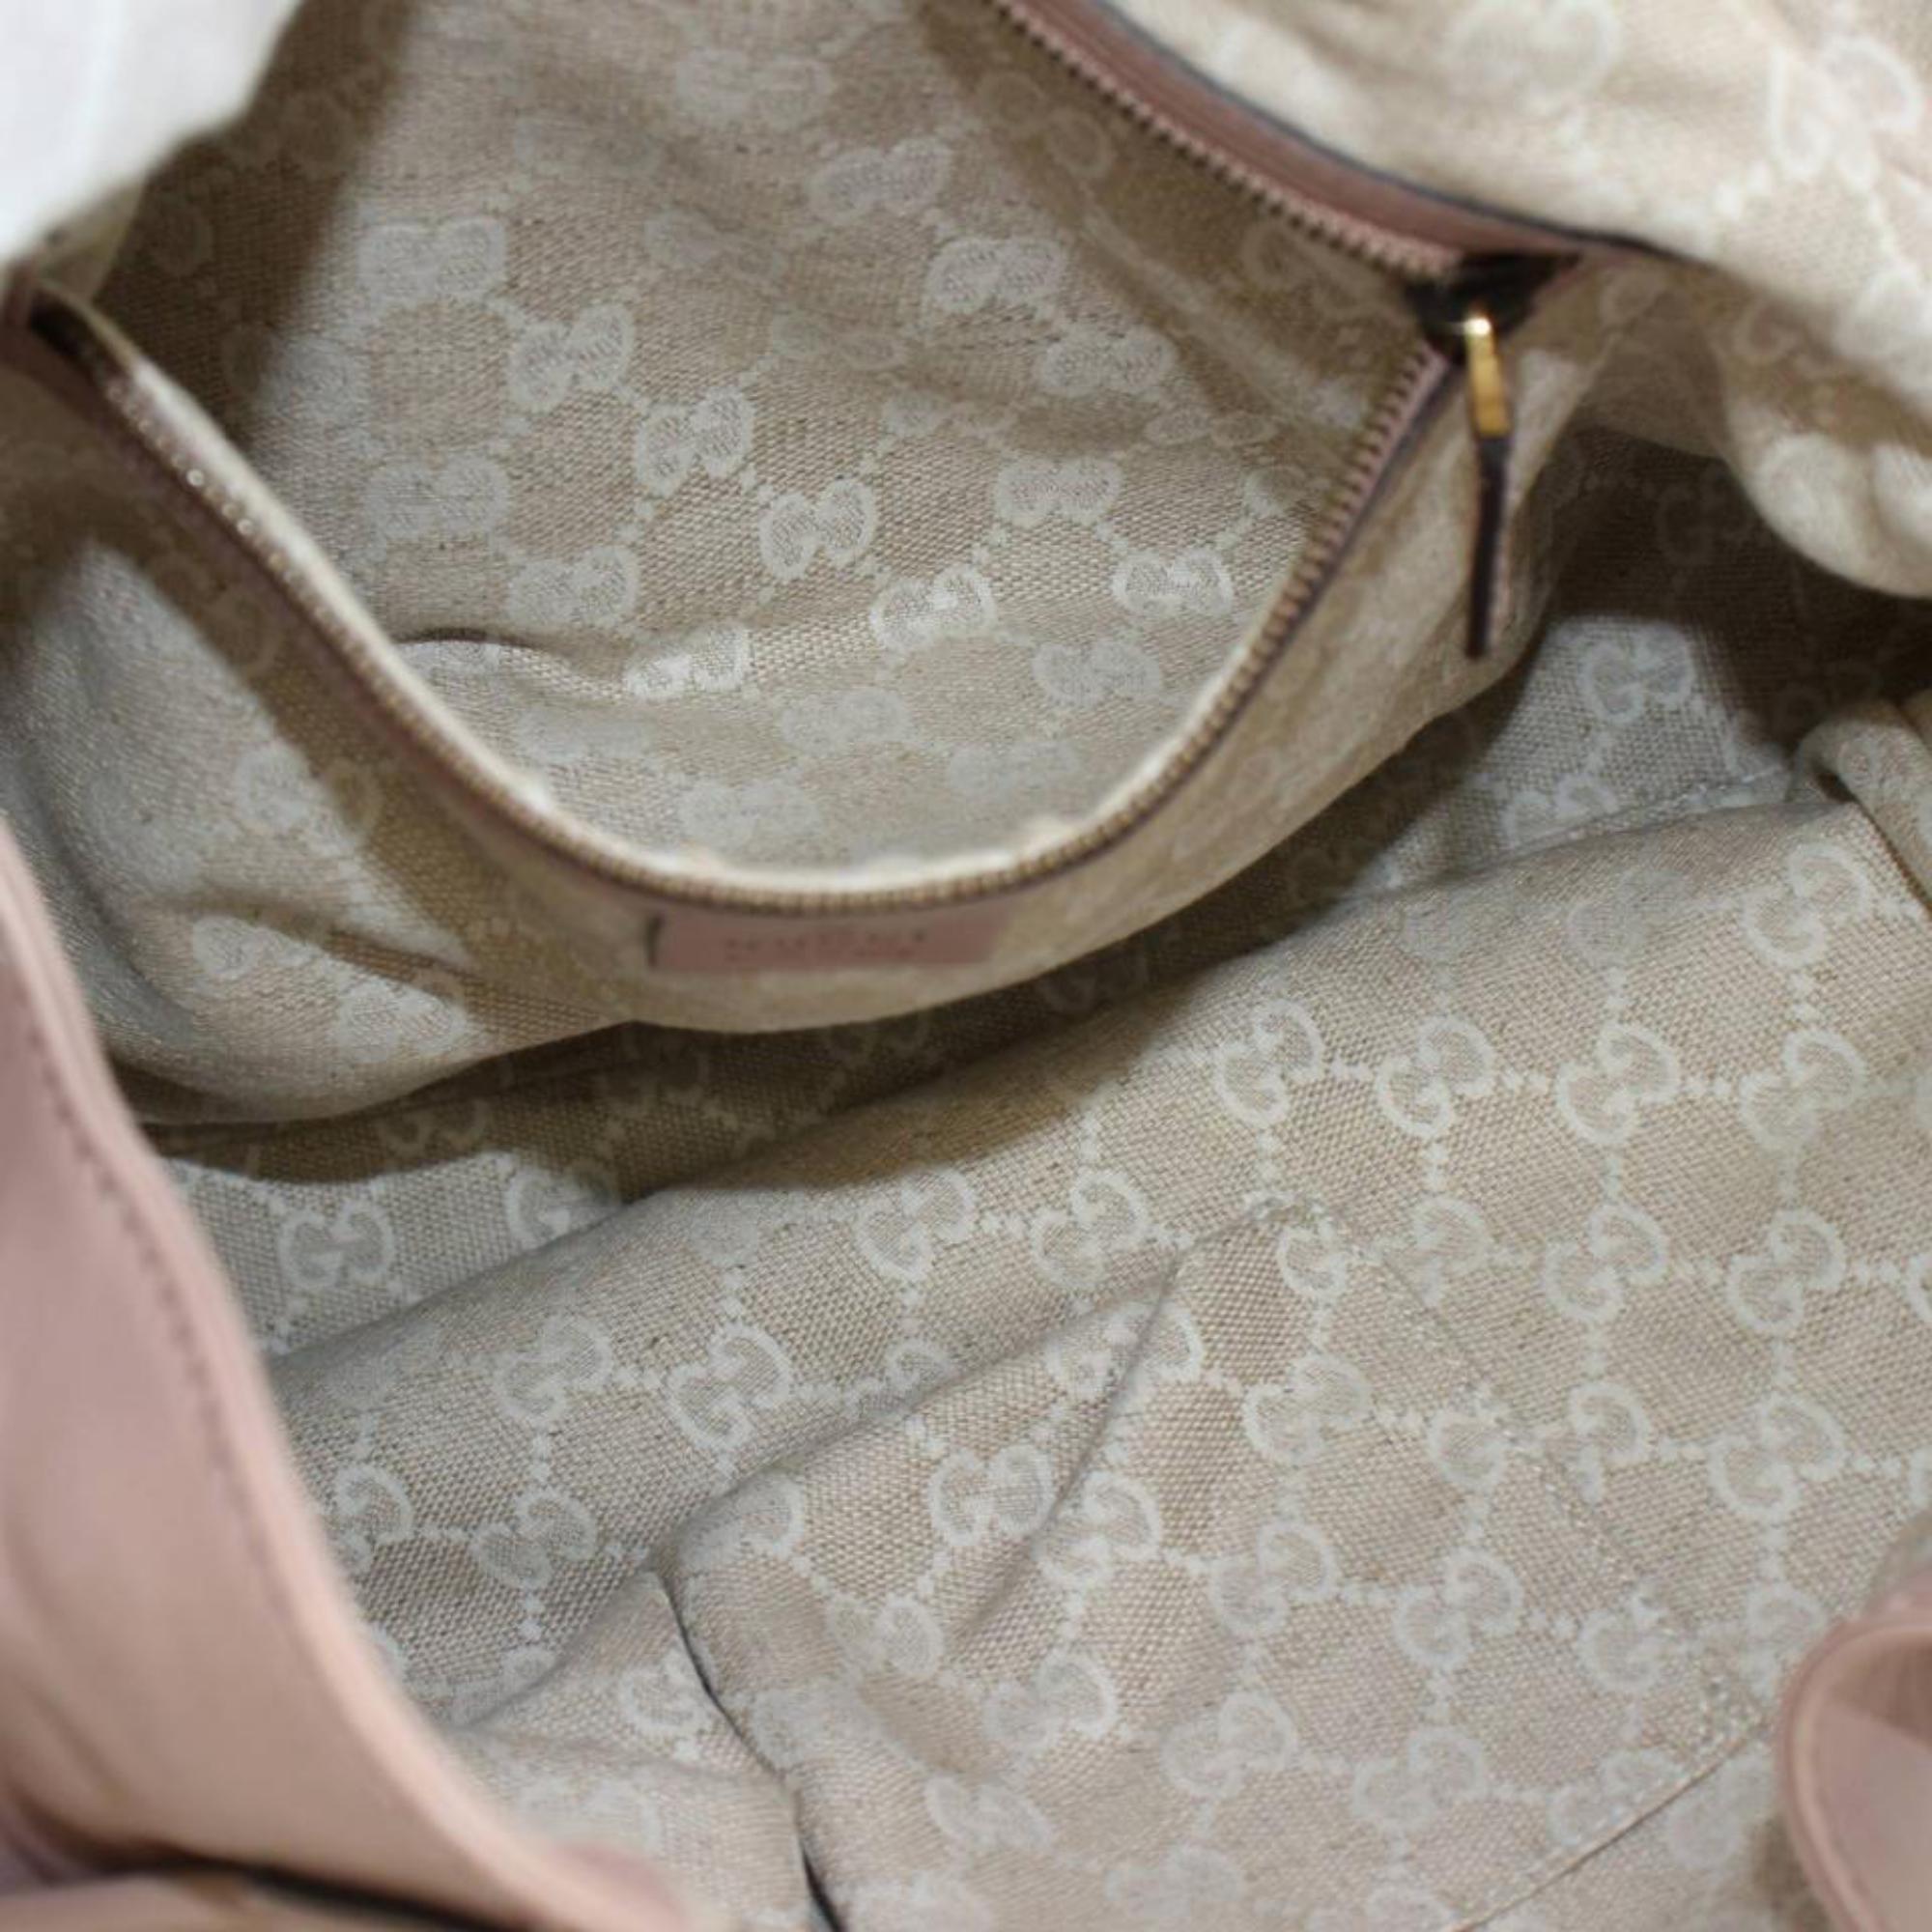 Gucci Stirrup Brocade Hobo 867302 Pink Leather Shoulder Bag In Good Condition For Sale In Forest Hills, NY